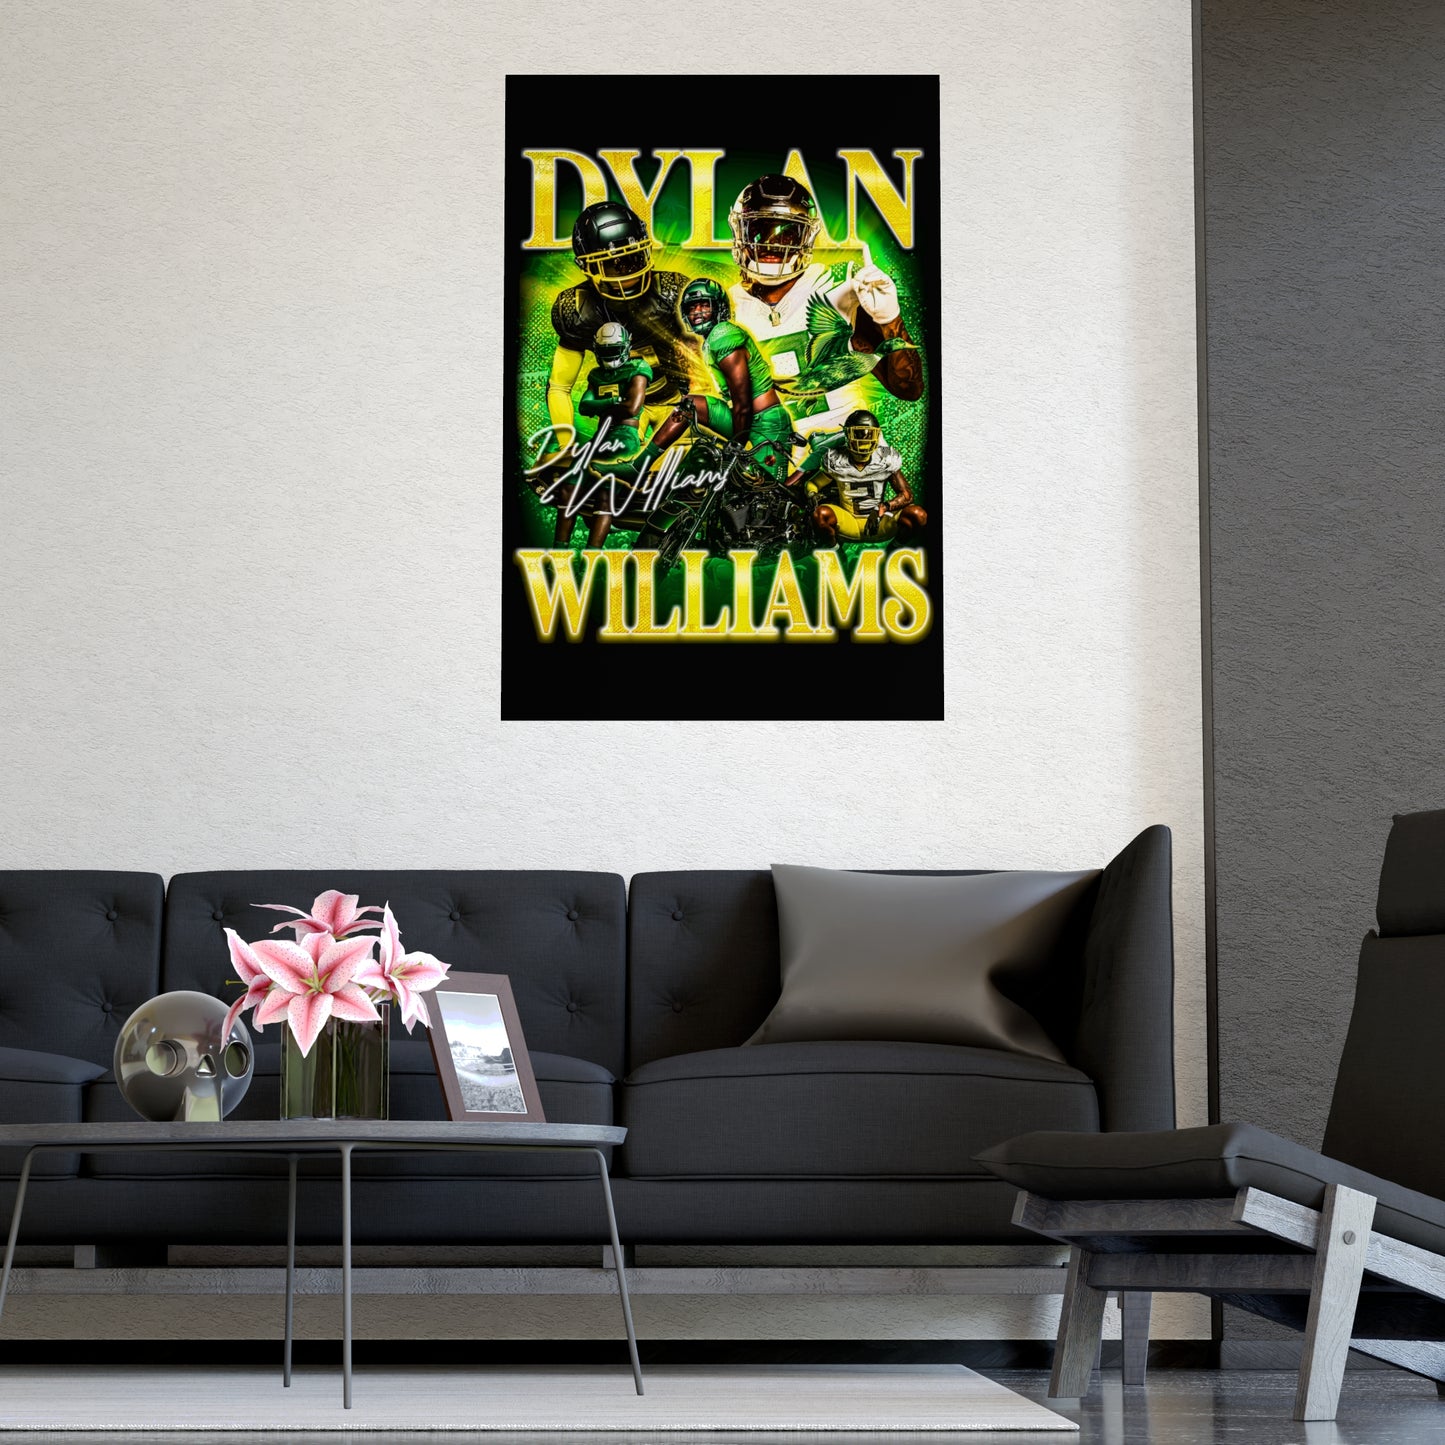 DYLAN WILLIAMS 24"x36" POSTER